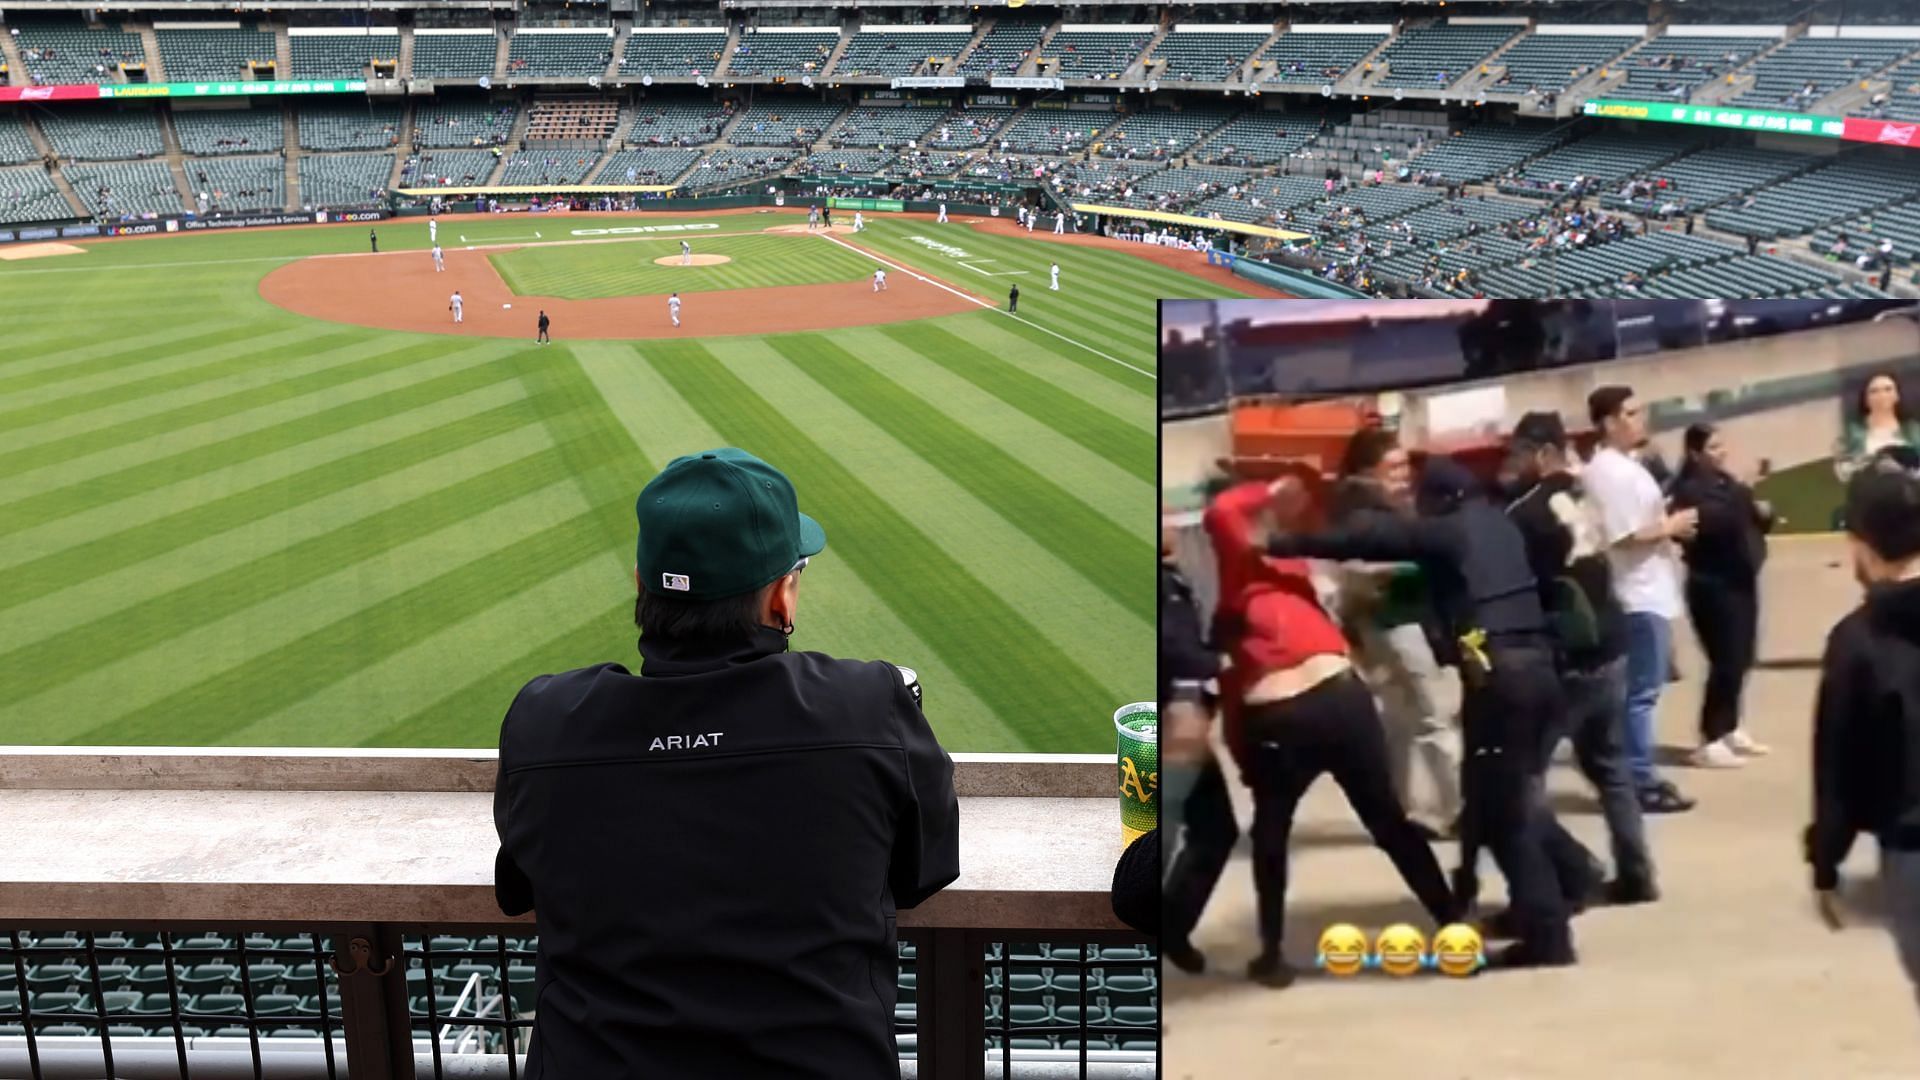 Oakland Athletics fans were involved in a brawl on Sunday